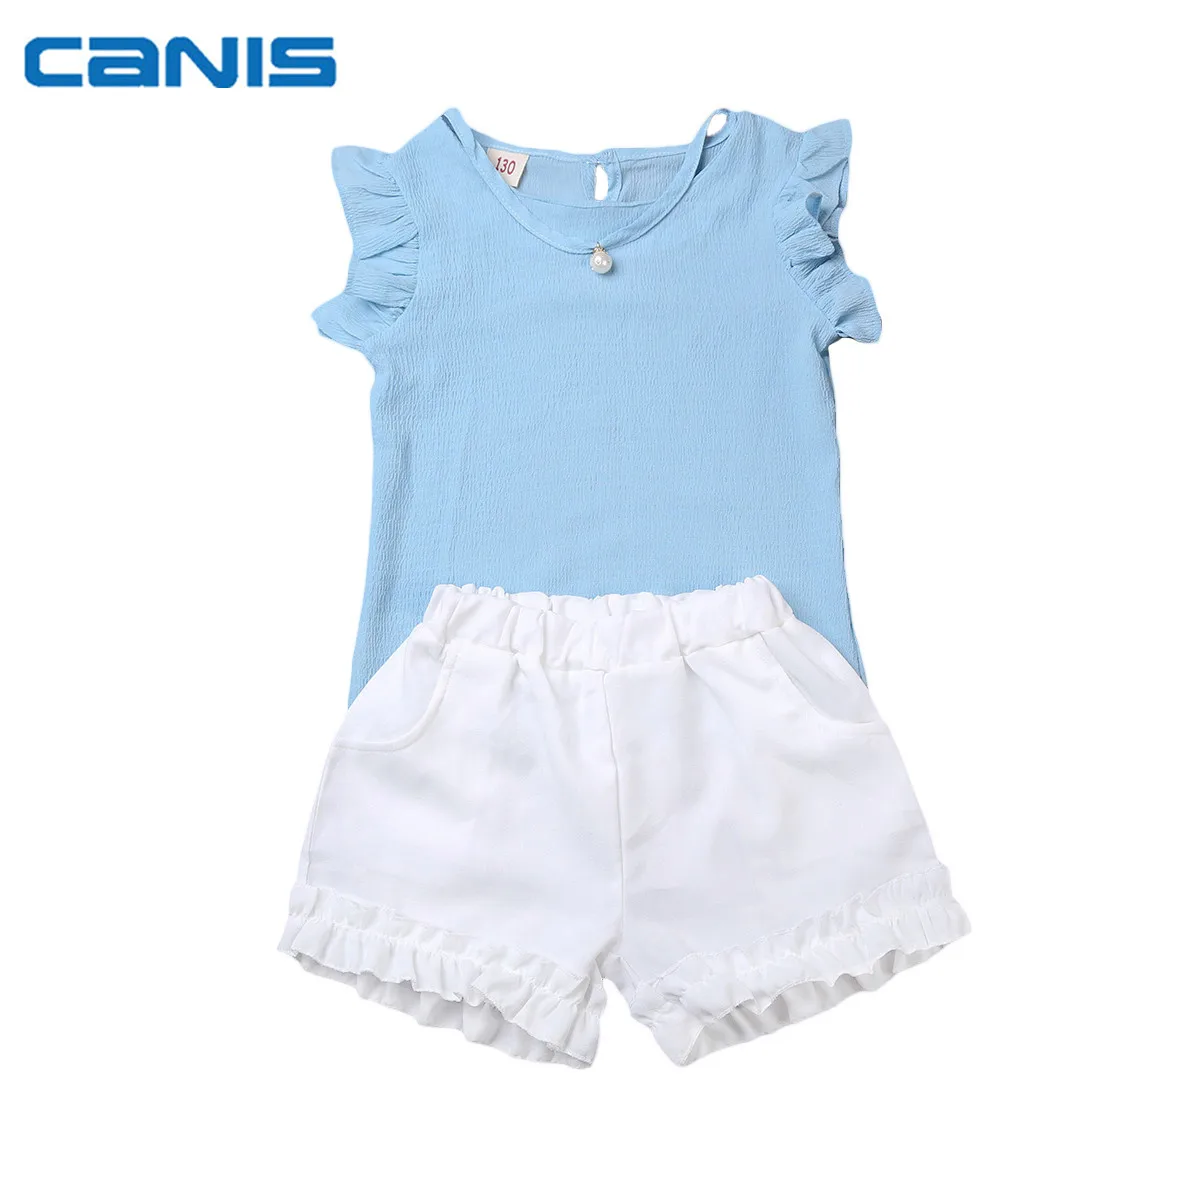 Toddler Infant Kids Baby Girls Outfits Clothes T shirt Tops Short ...